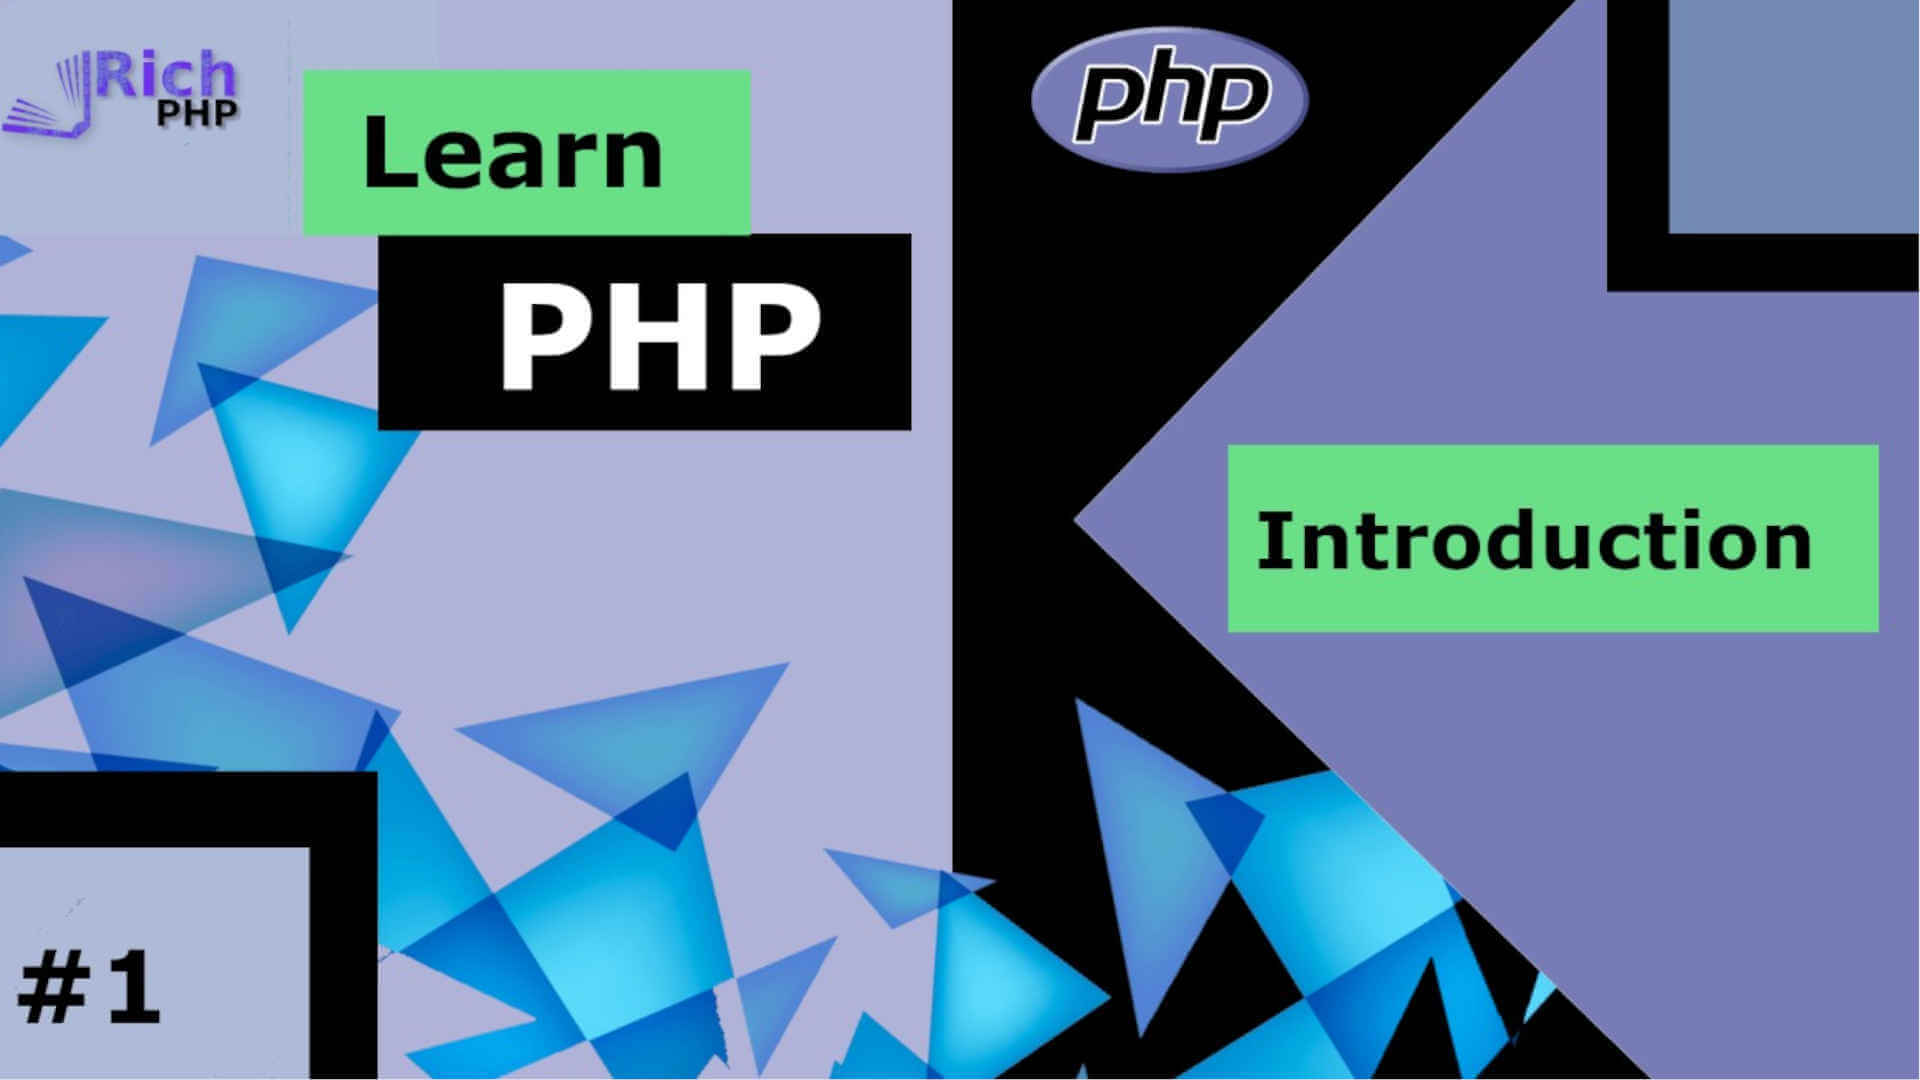 PHP Tutorial 1 - Introduction (PHP For Beginners)